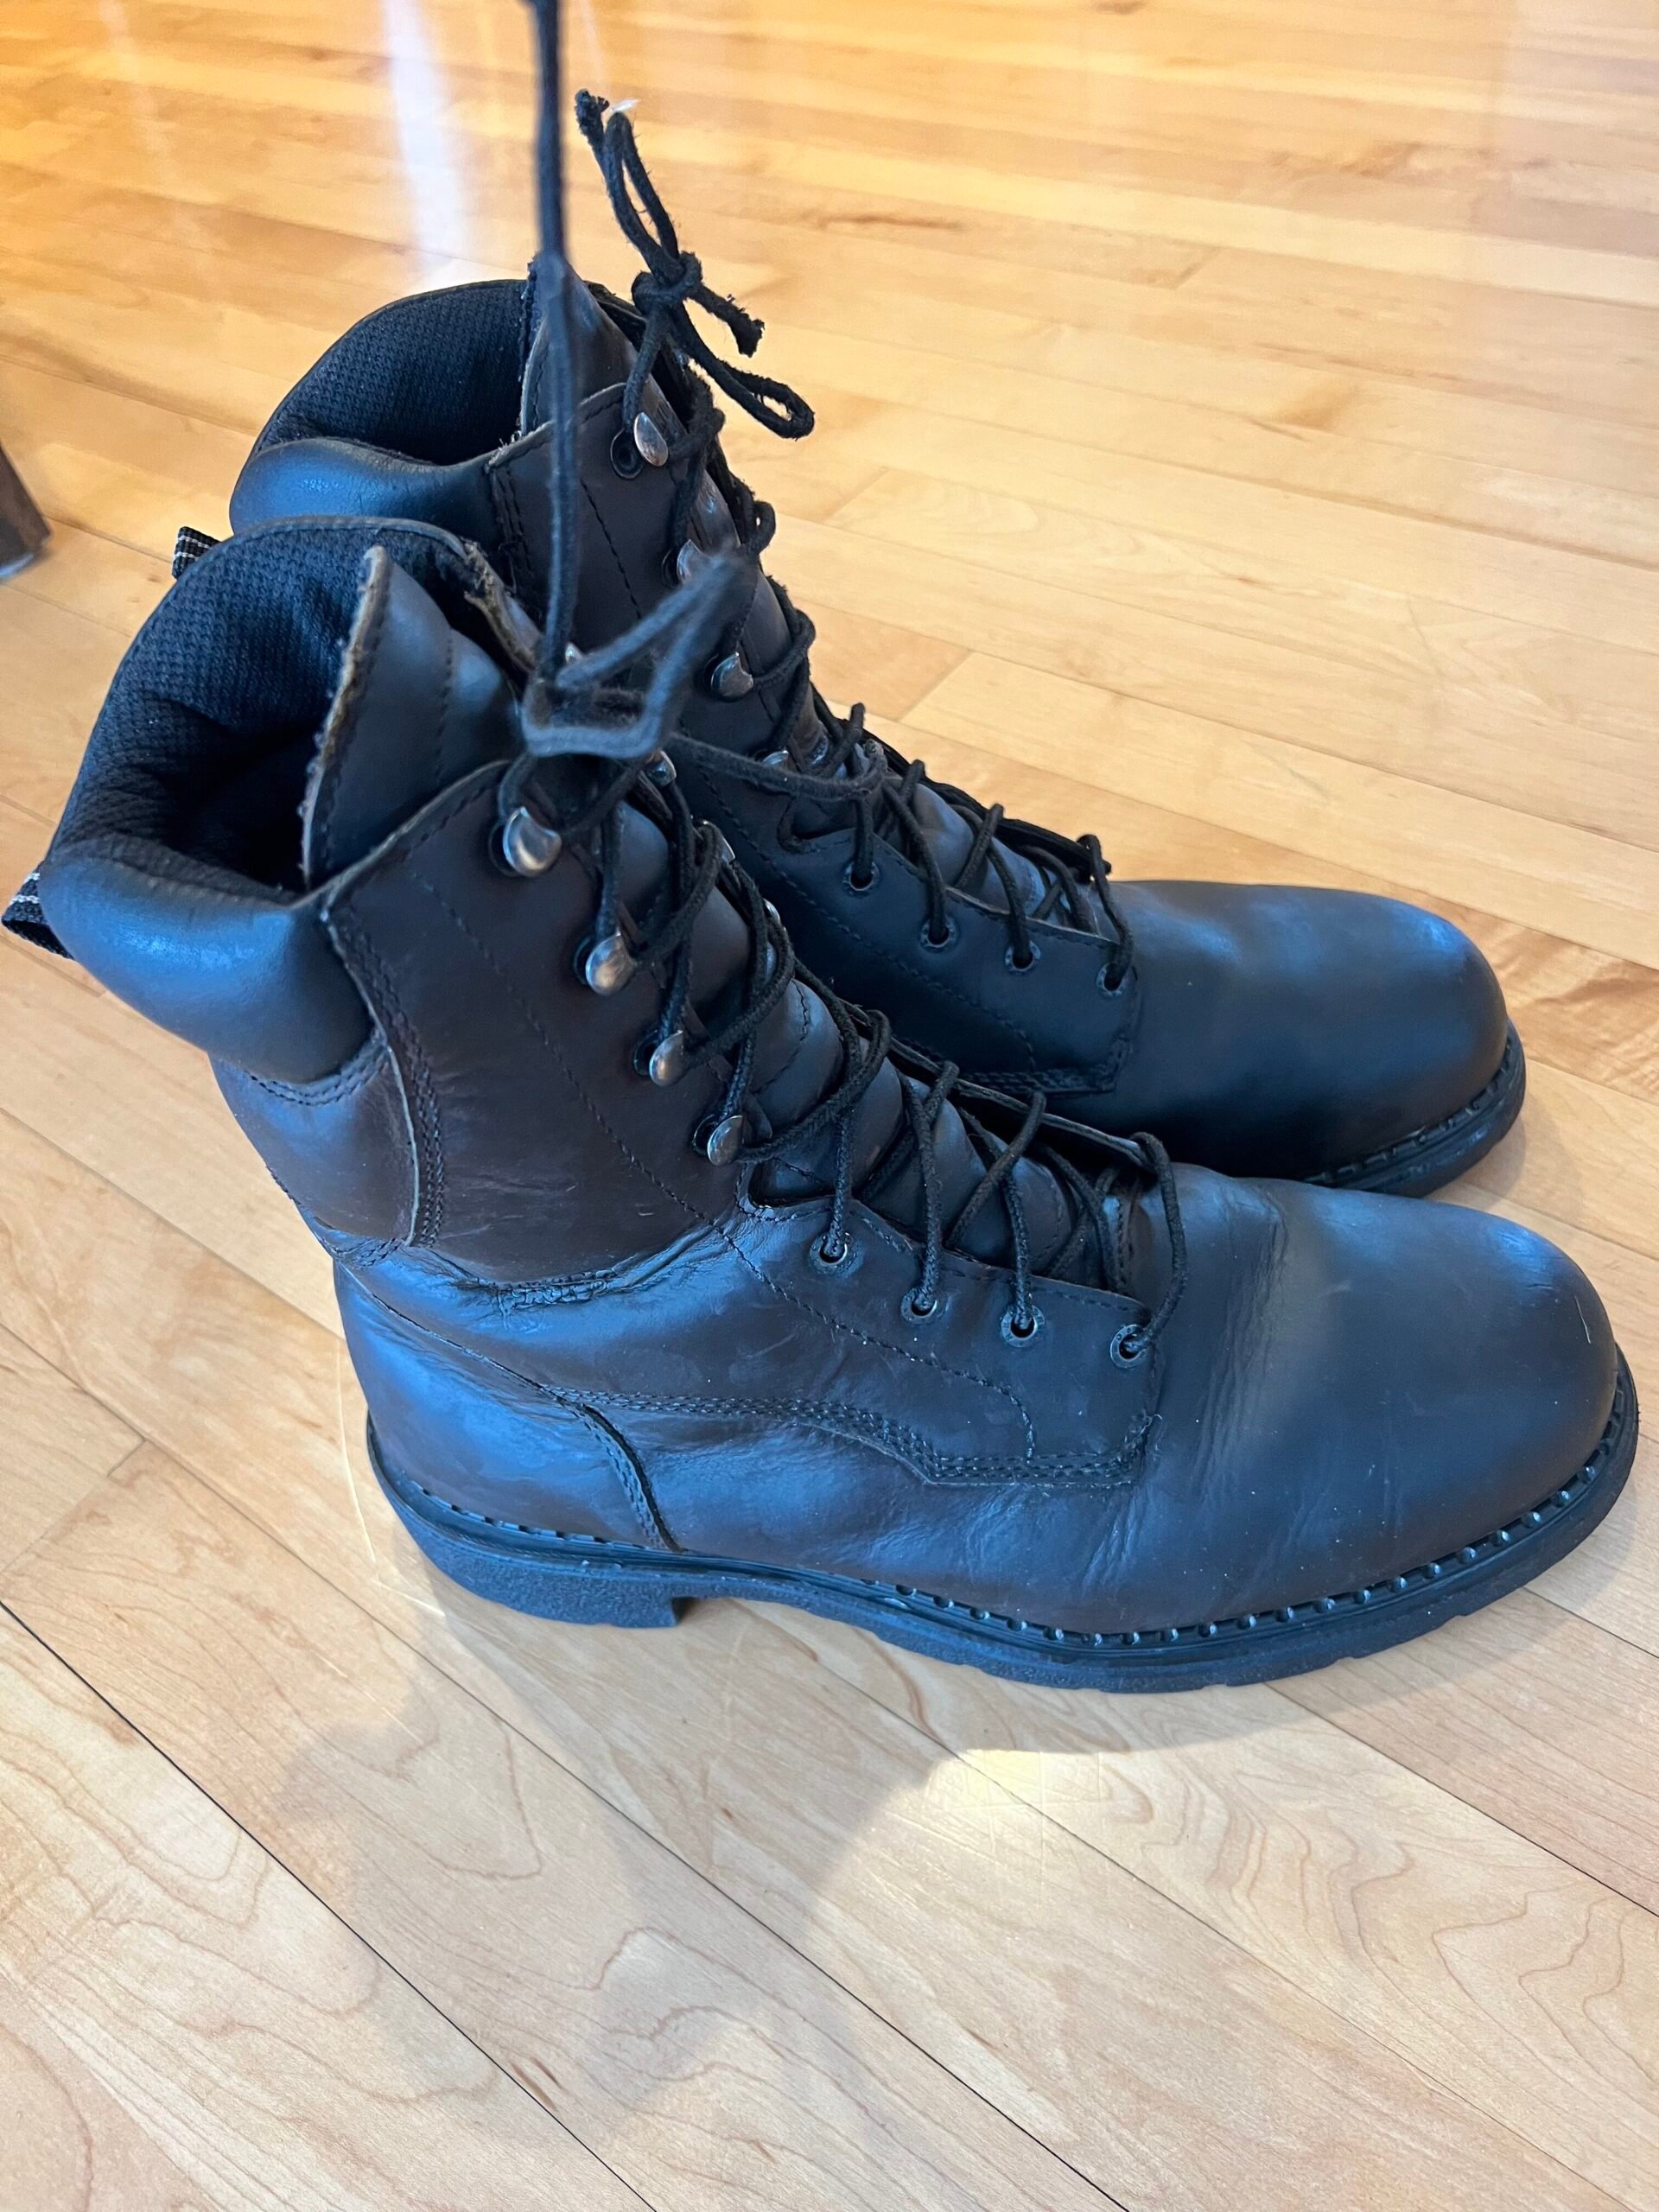 Red Wing steel toe boots, 10.5 - Classified Ads - Classified Ads | In ...